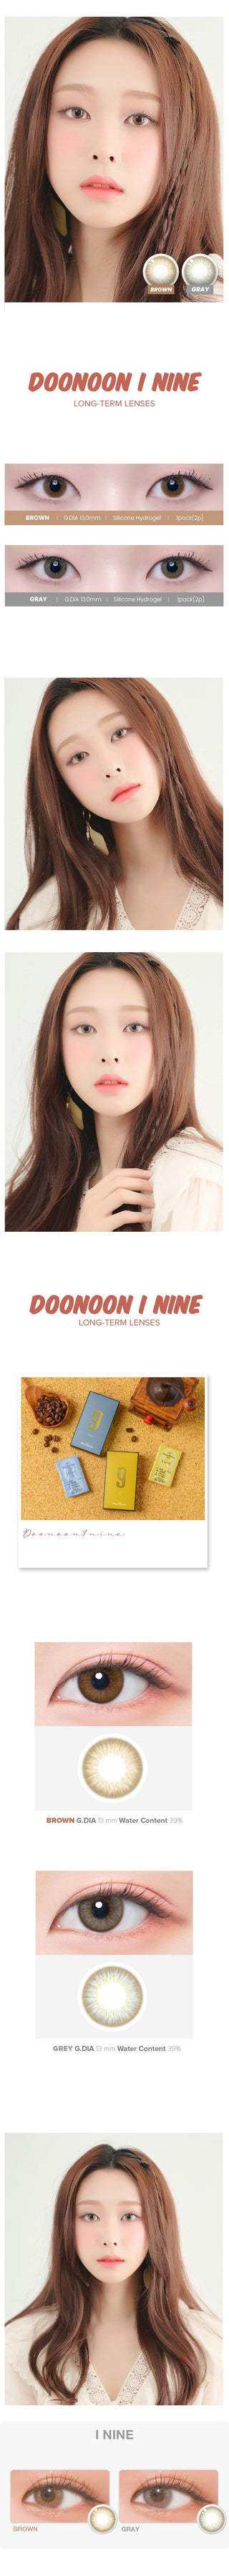 Variety of DooNoon I Nine Grey contact lens colors displayed, with closeups of an eye wearing the contact lens colors, and with a model wearing the contact lens colors showing realistic eye-enlarging effect from various angles.